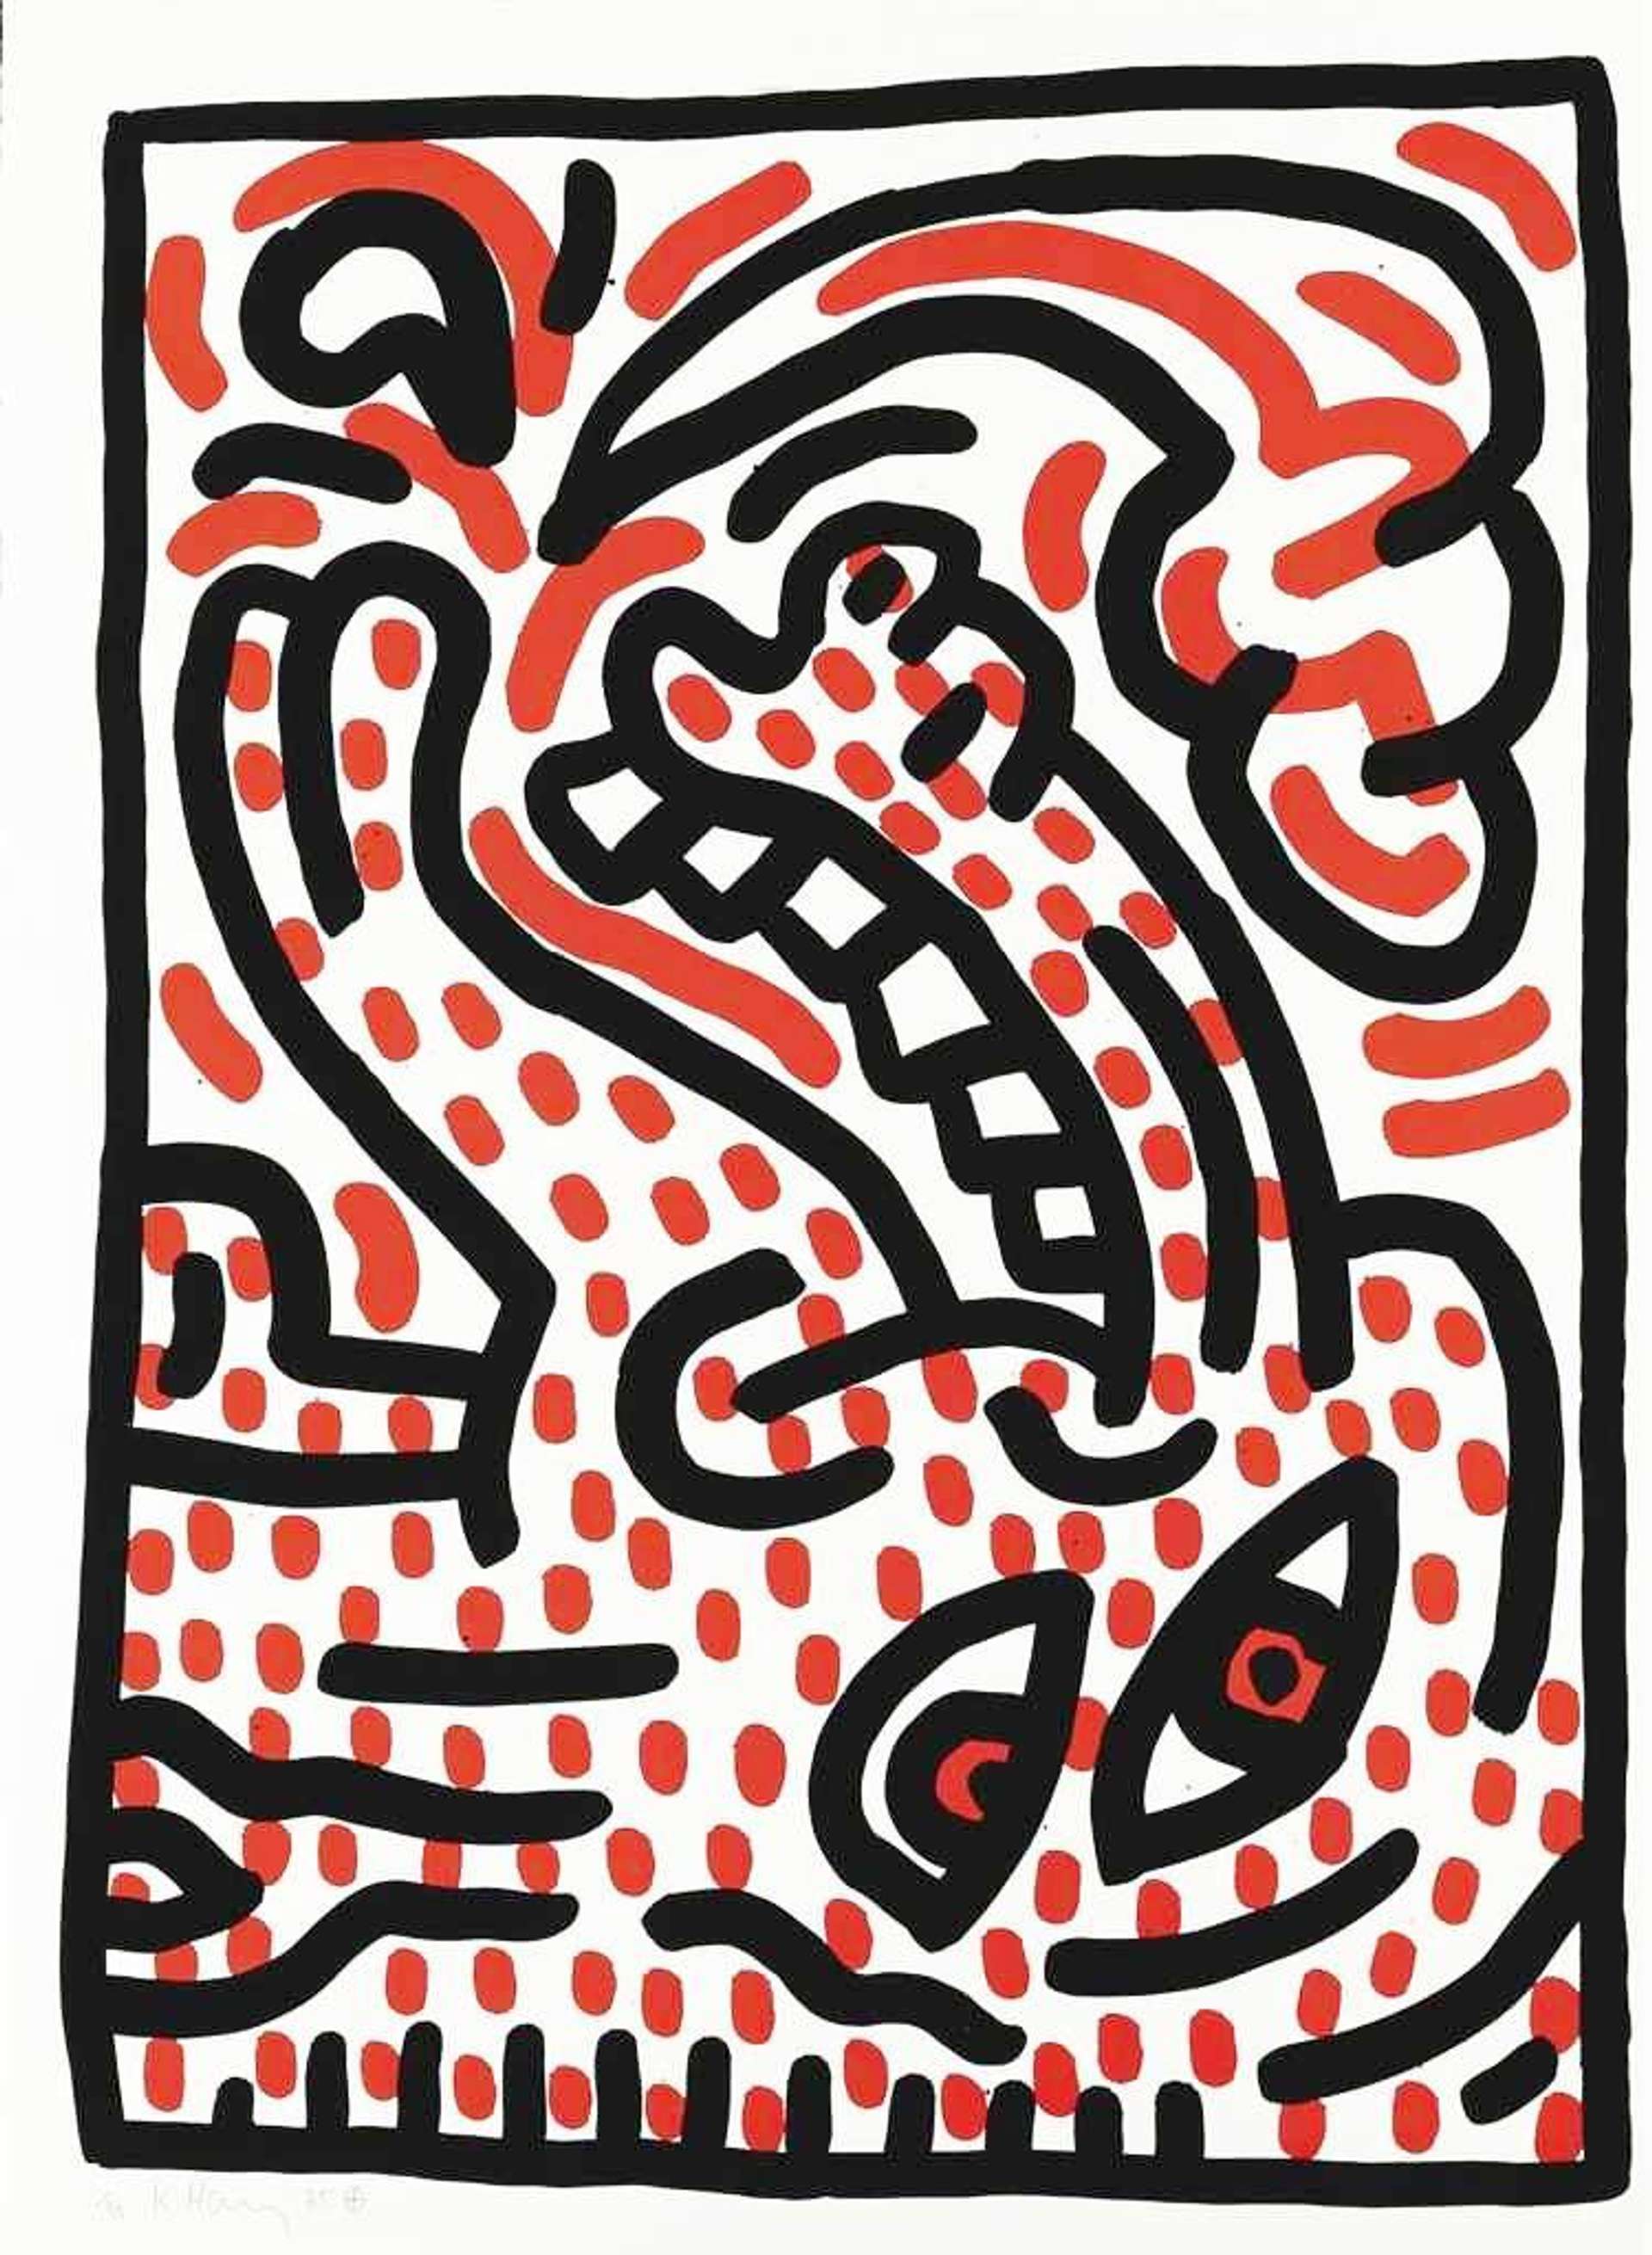 Ludo 4 - Signed Print by Keith Haring 1985 - MyArtBroker